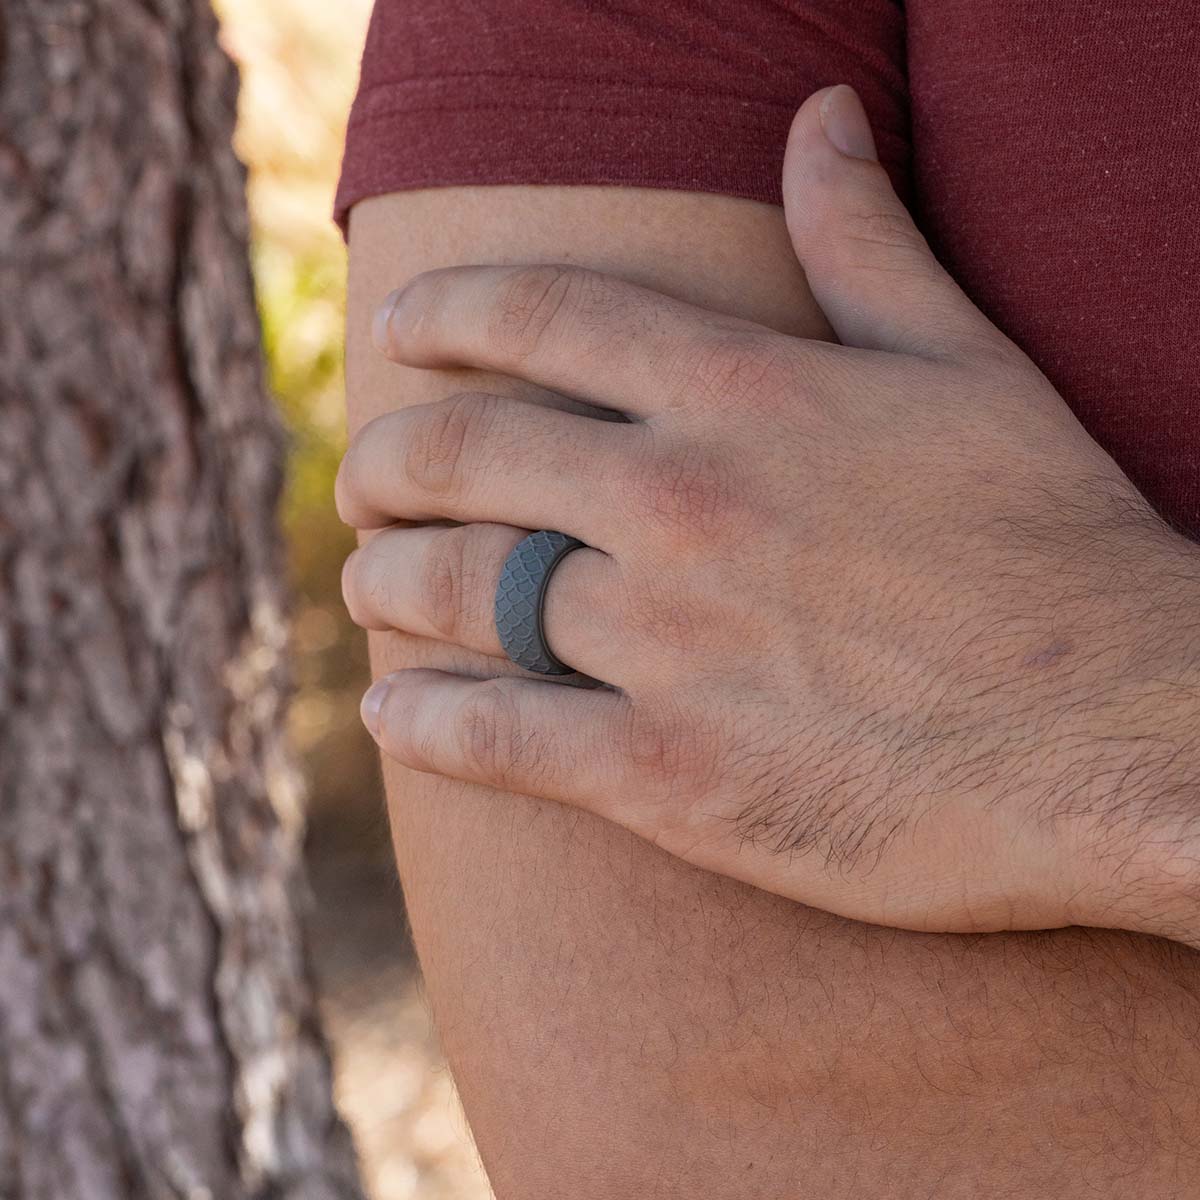 Gray silicone patterned wedding ring on a male hand